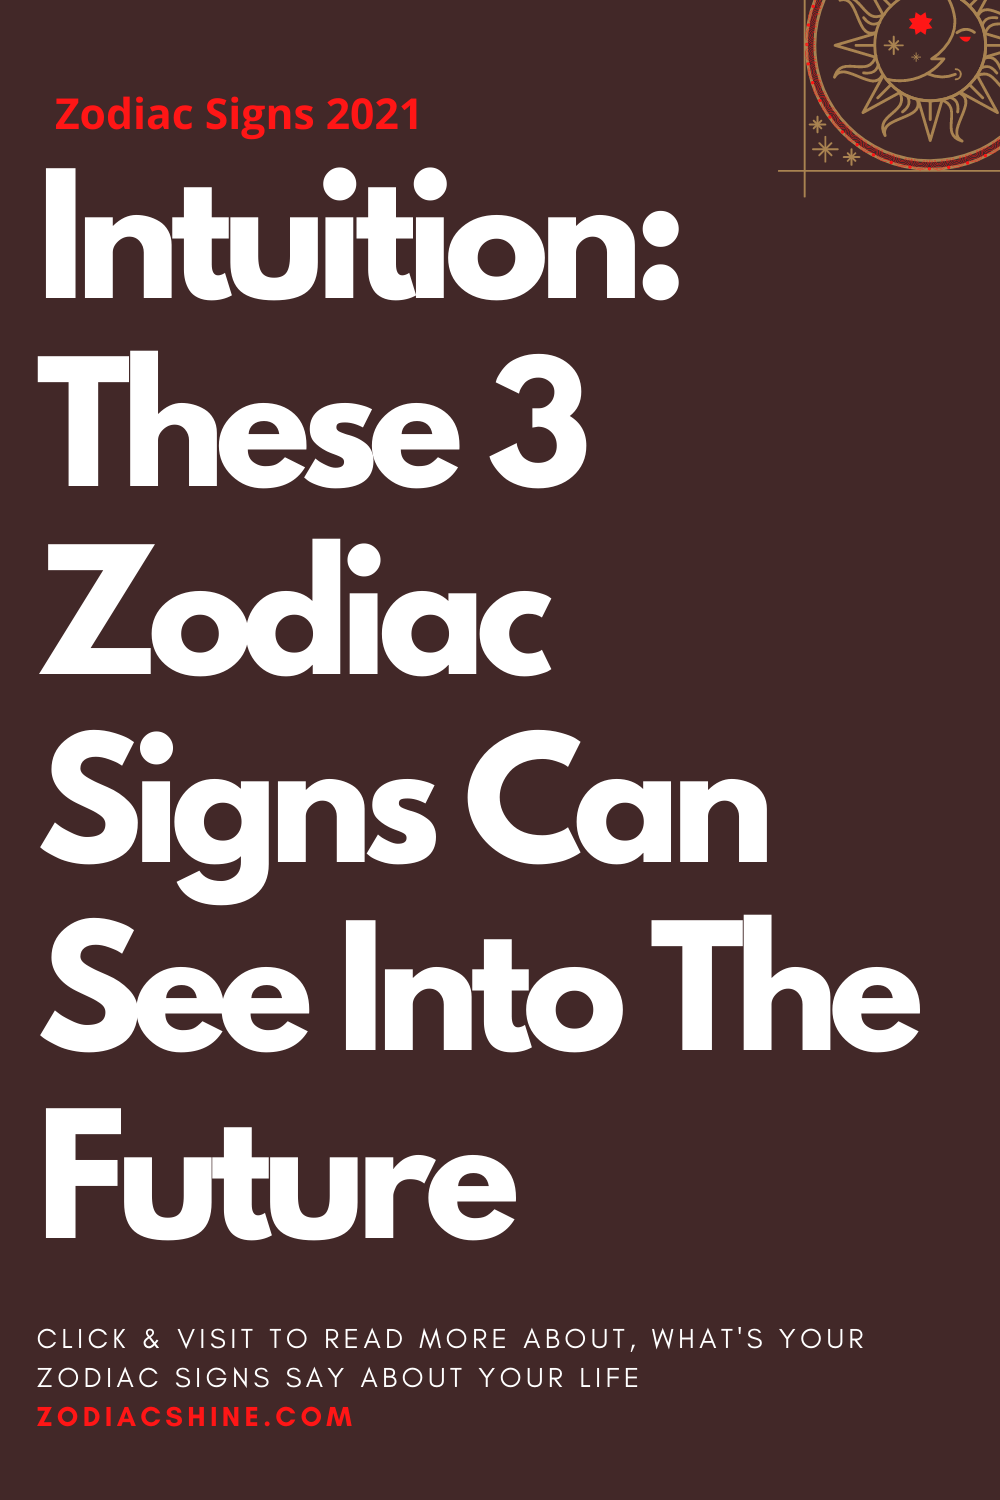 Intuition: These 3 Zodiac Signs Can See Into The Future